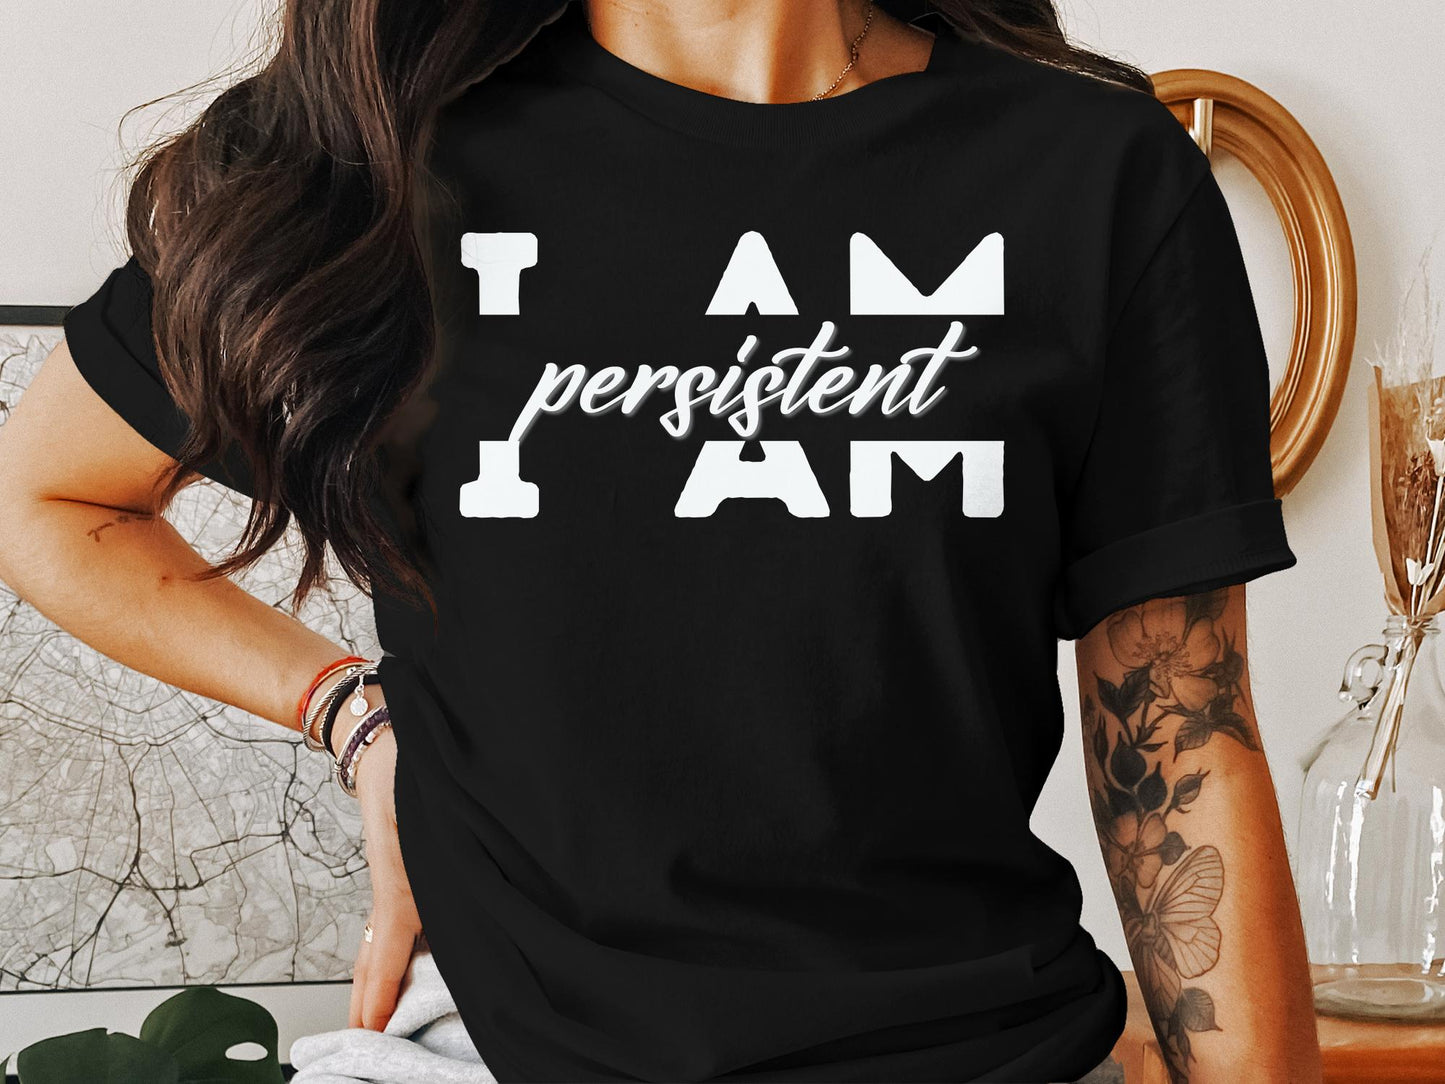 I Am Persistent - An encouraging and motivating Affirmation Quote T-shirt.